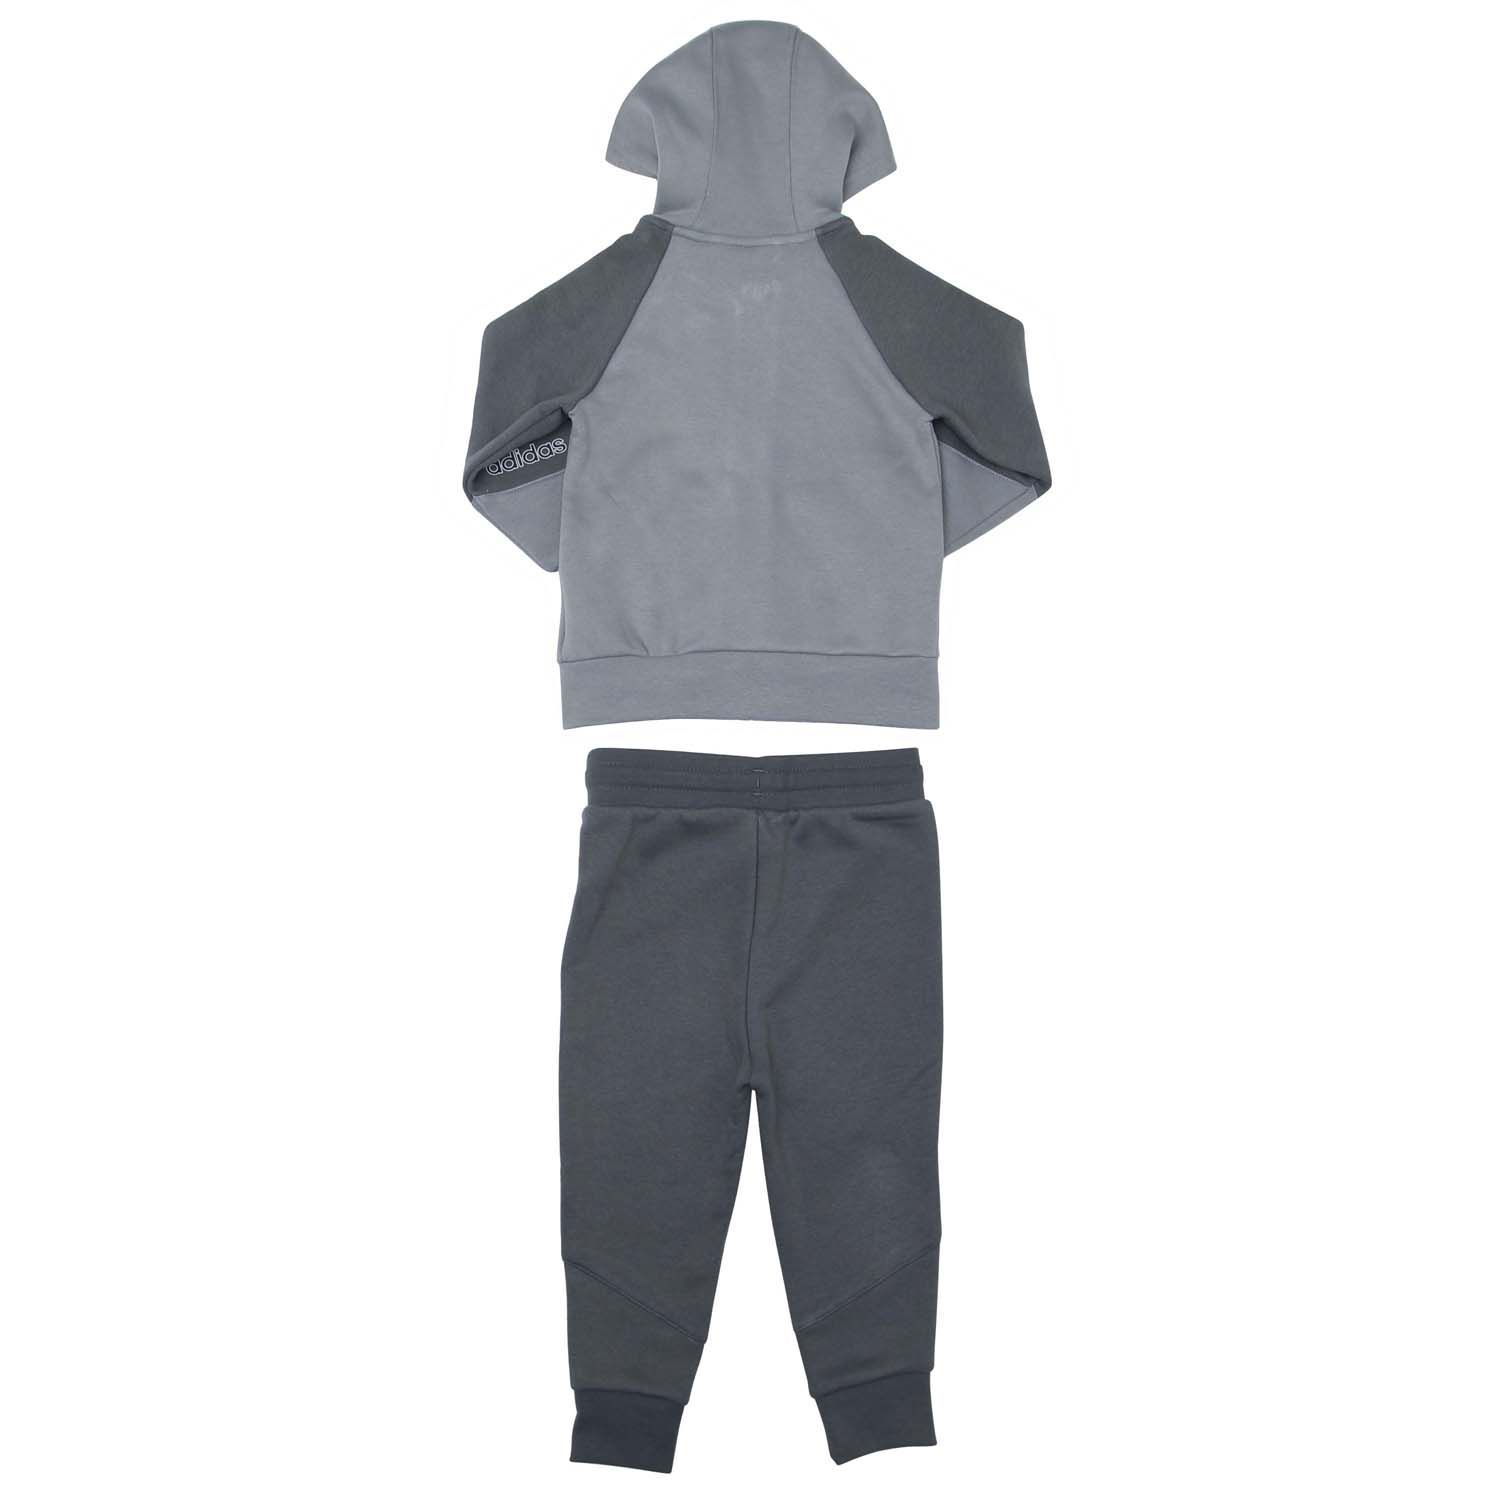 Baby adidas Originals SPRT Full-Zip Hoody Set in grey.Top:- Lined hood.- Ribbed cuffs and hem.- Long sleeves.- Kangaroo style pocket to front.- Regular fit.- Main material: 70% Cotton  30% Polyester (Recycled). Pants: - Drawcord on ribbed waist.- Ribbed cuffs.- Fleece.- Trefoil logo printed at left thigh.- Regular fit.- Main material: 70% Cotton  30% Polyester (Recycled). - Ref: H25240